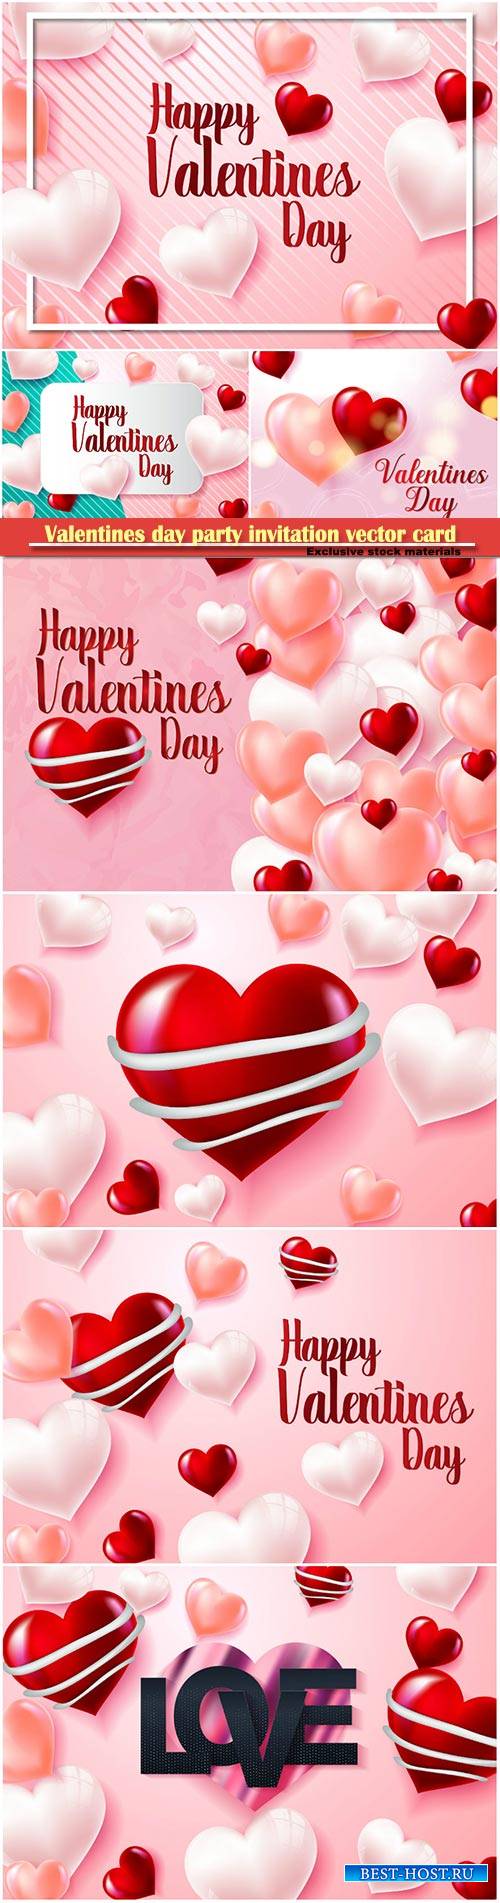 Valentines day party invitation vector card # 35